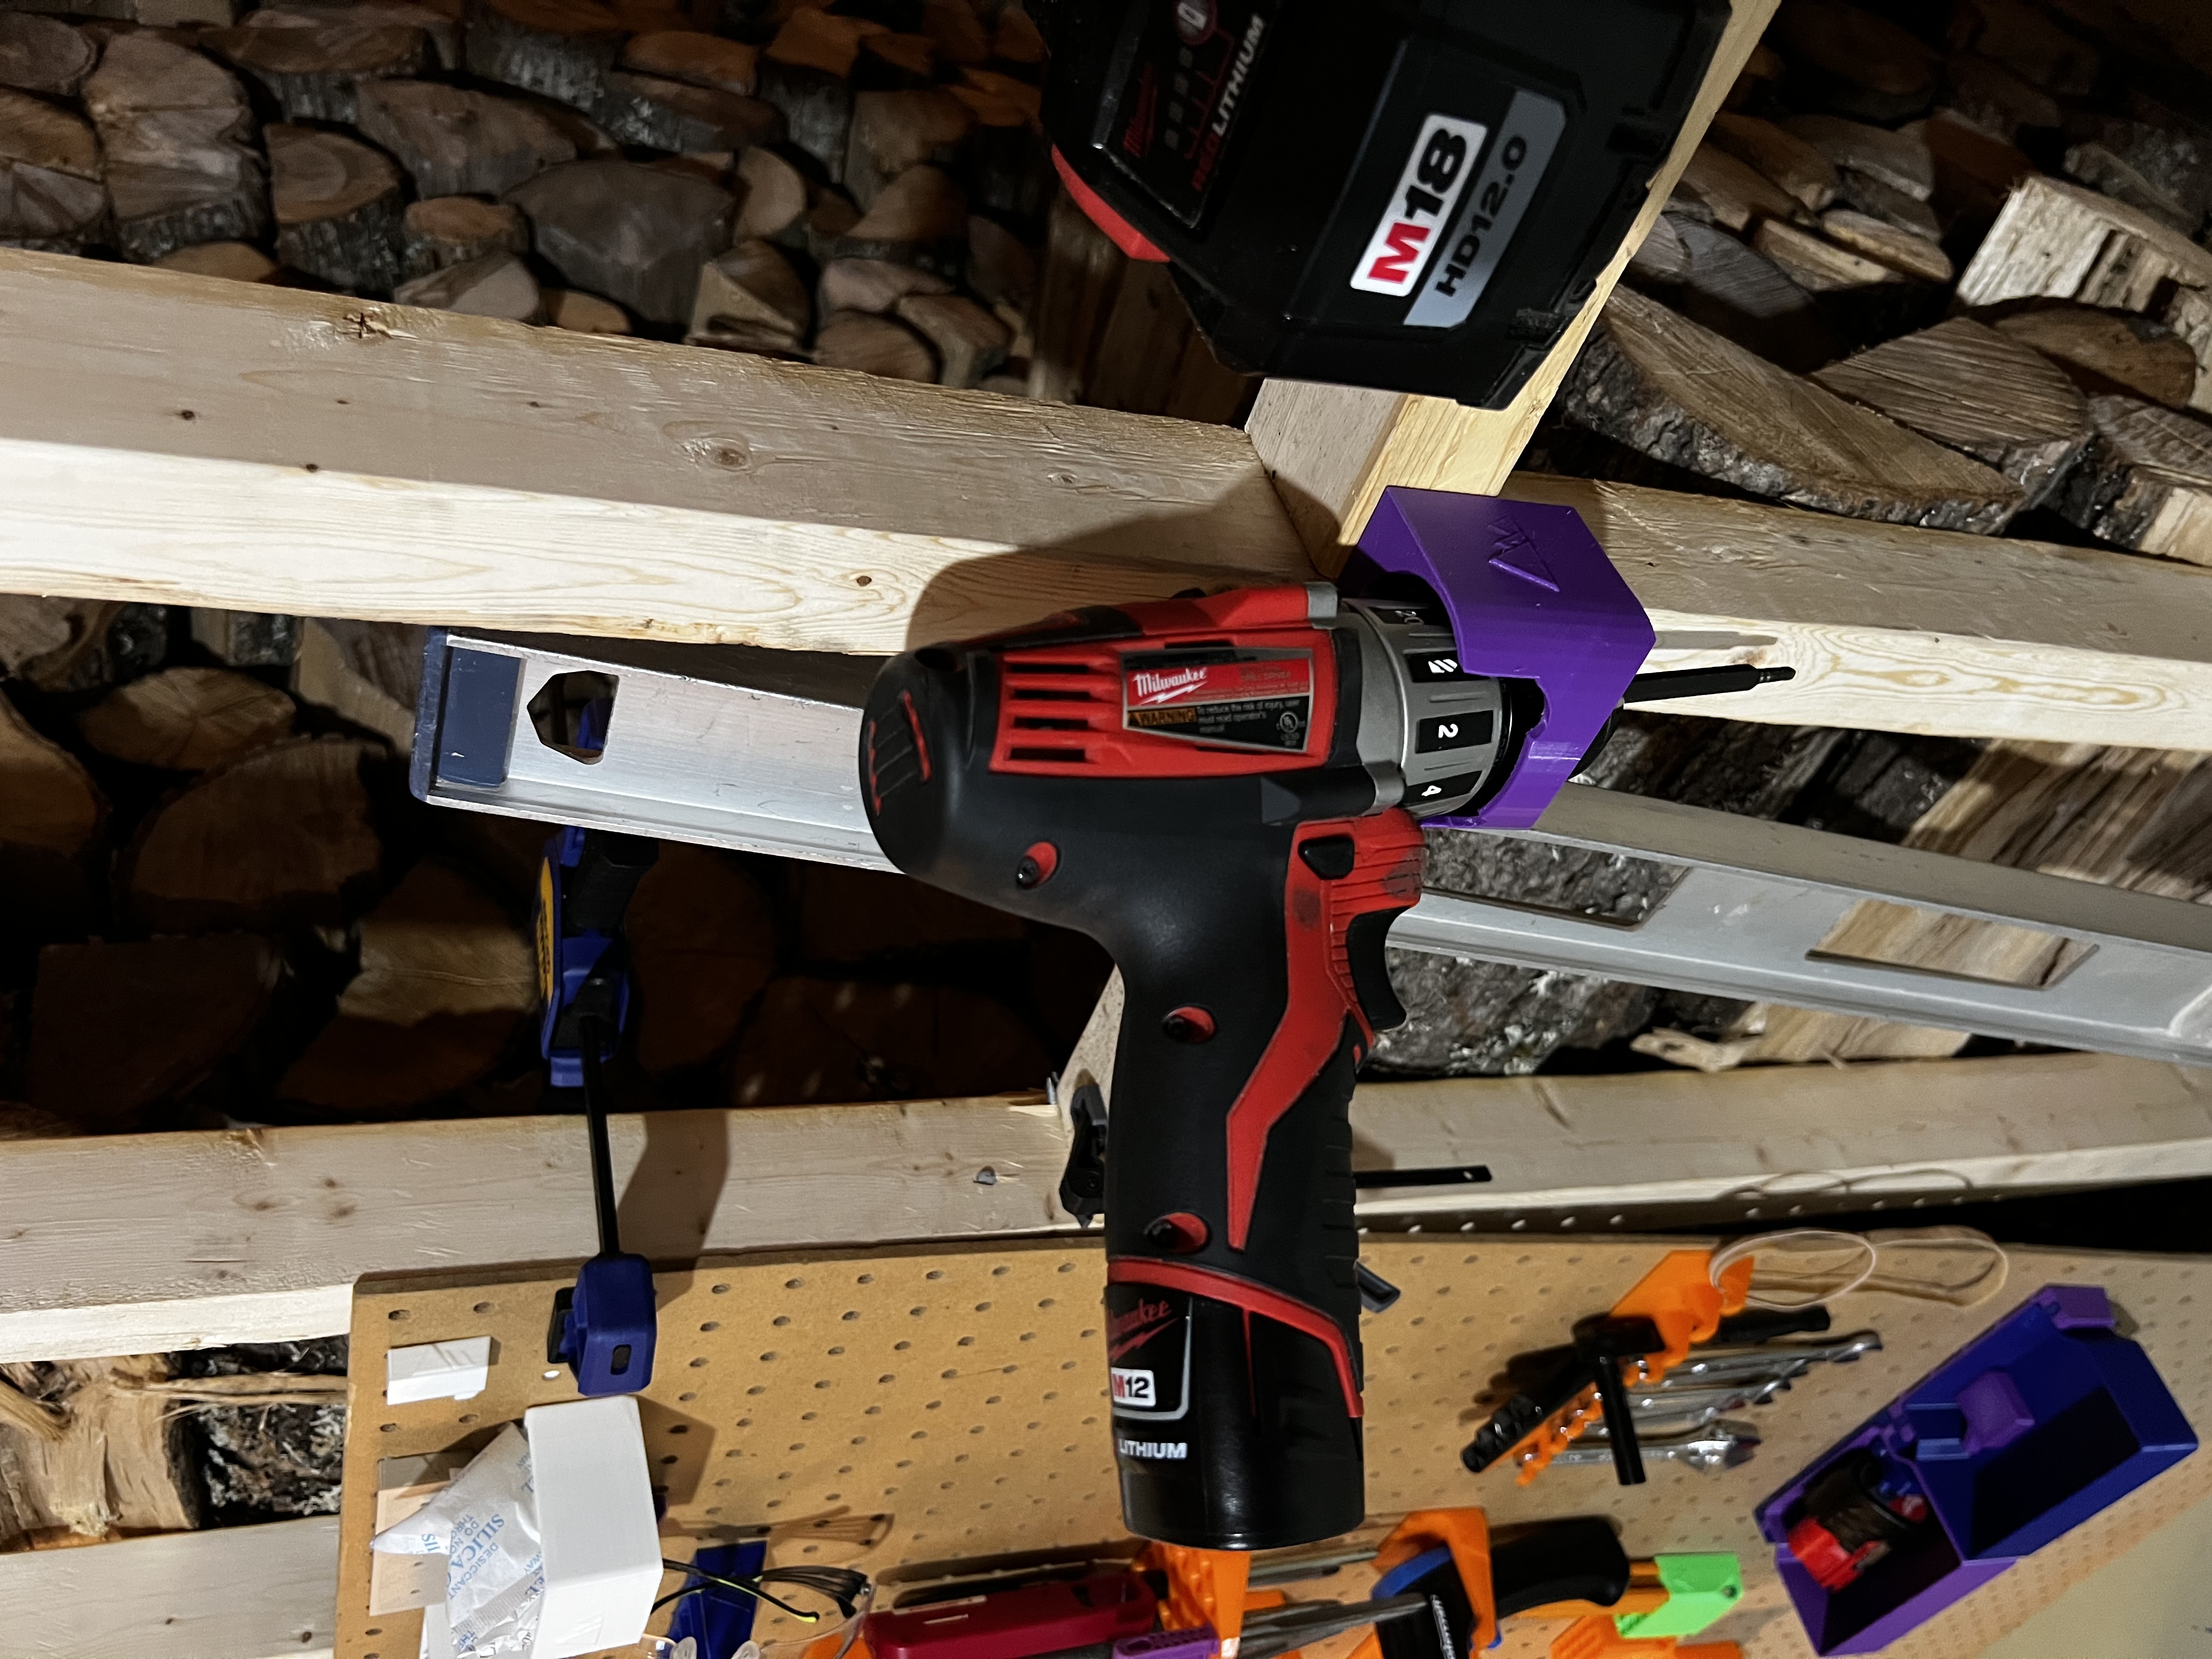 Wall tool mount collection